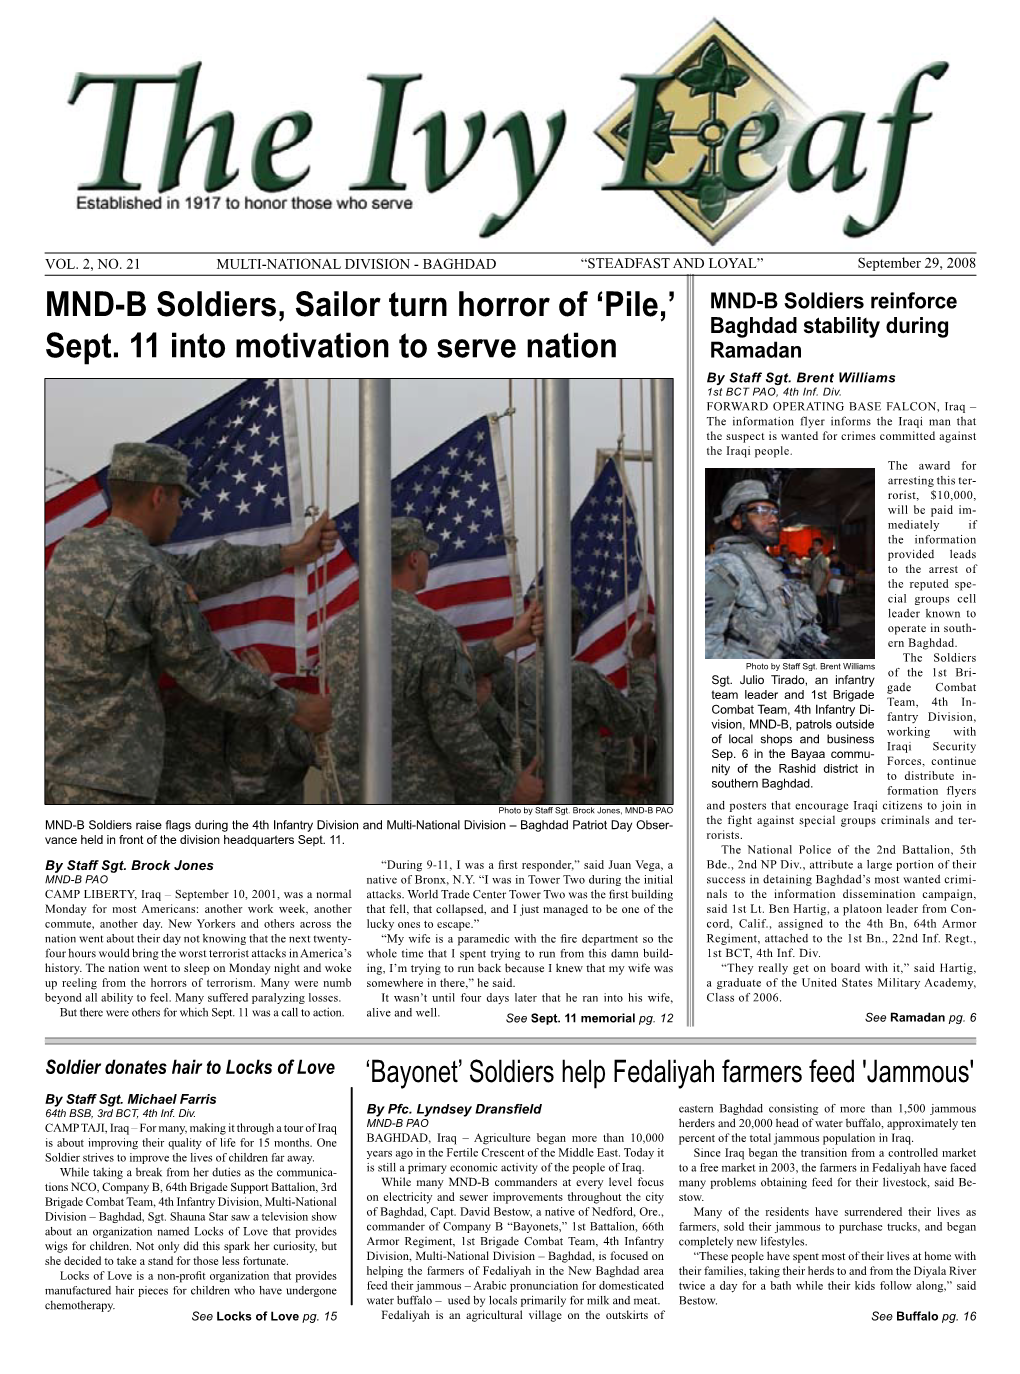 MND-B Soldiers, Sailor Turn Horror of 'Pile,'